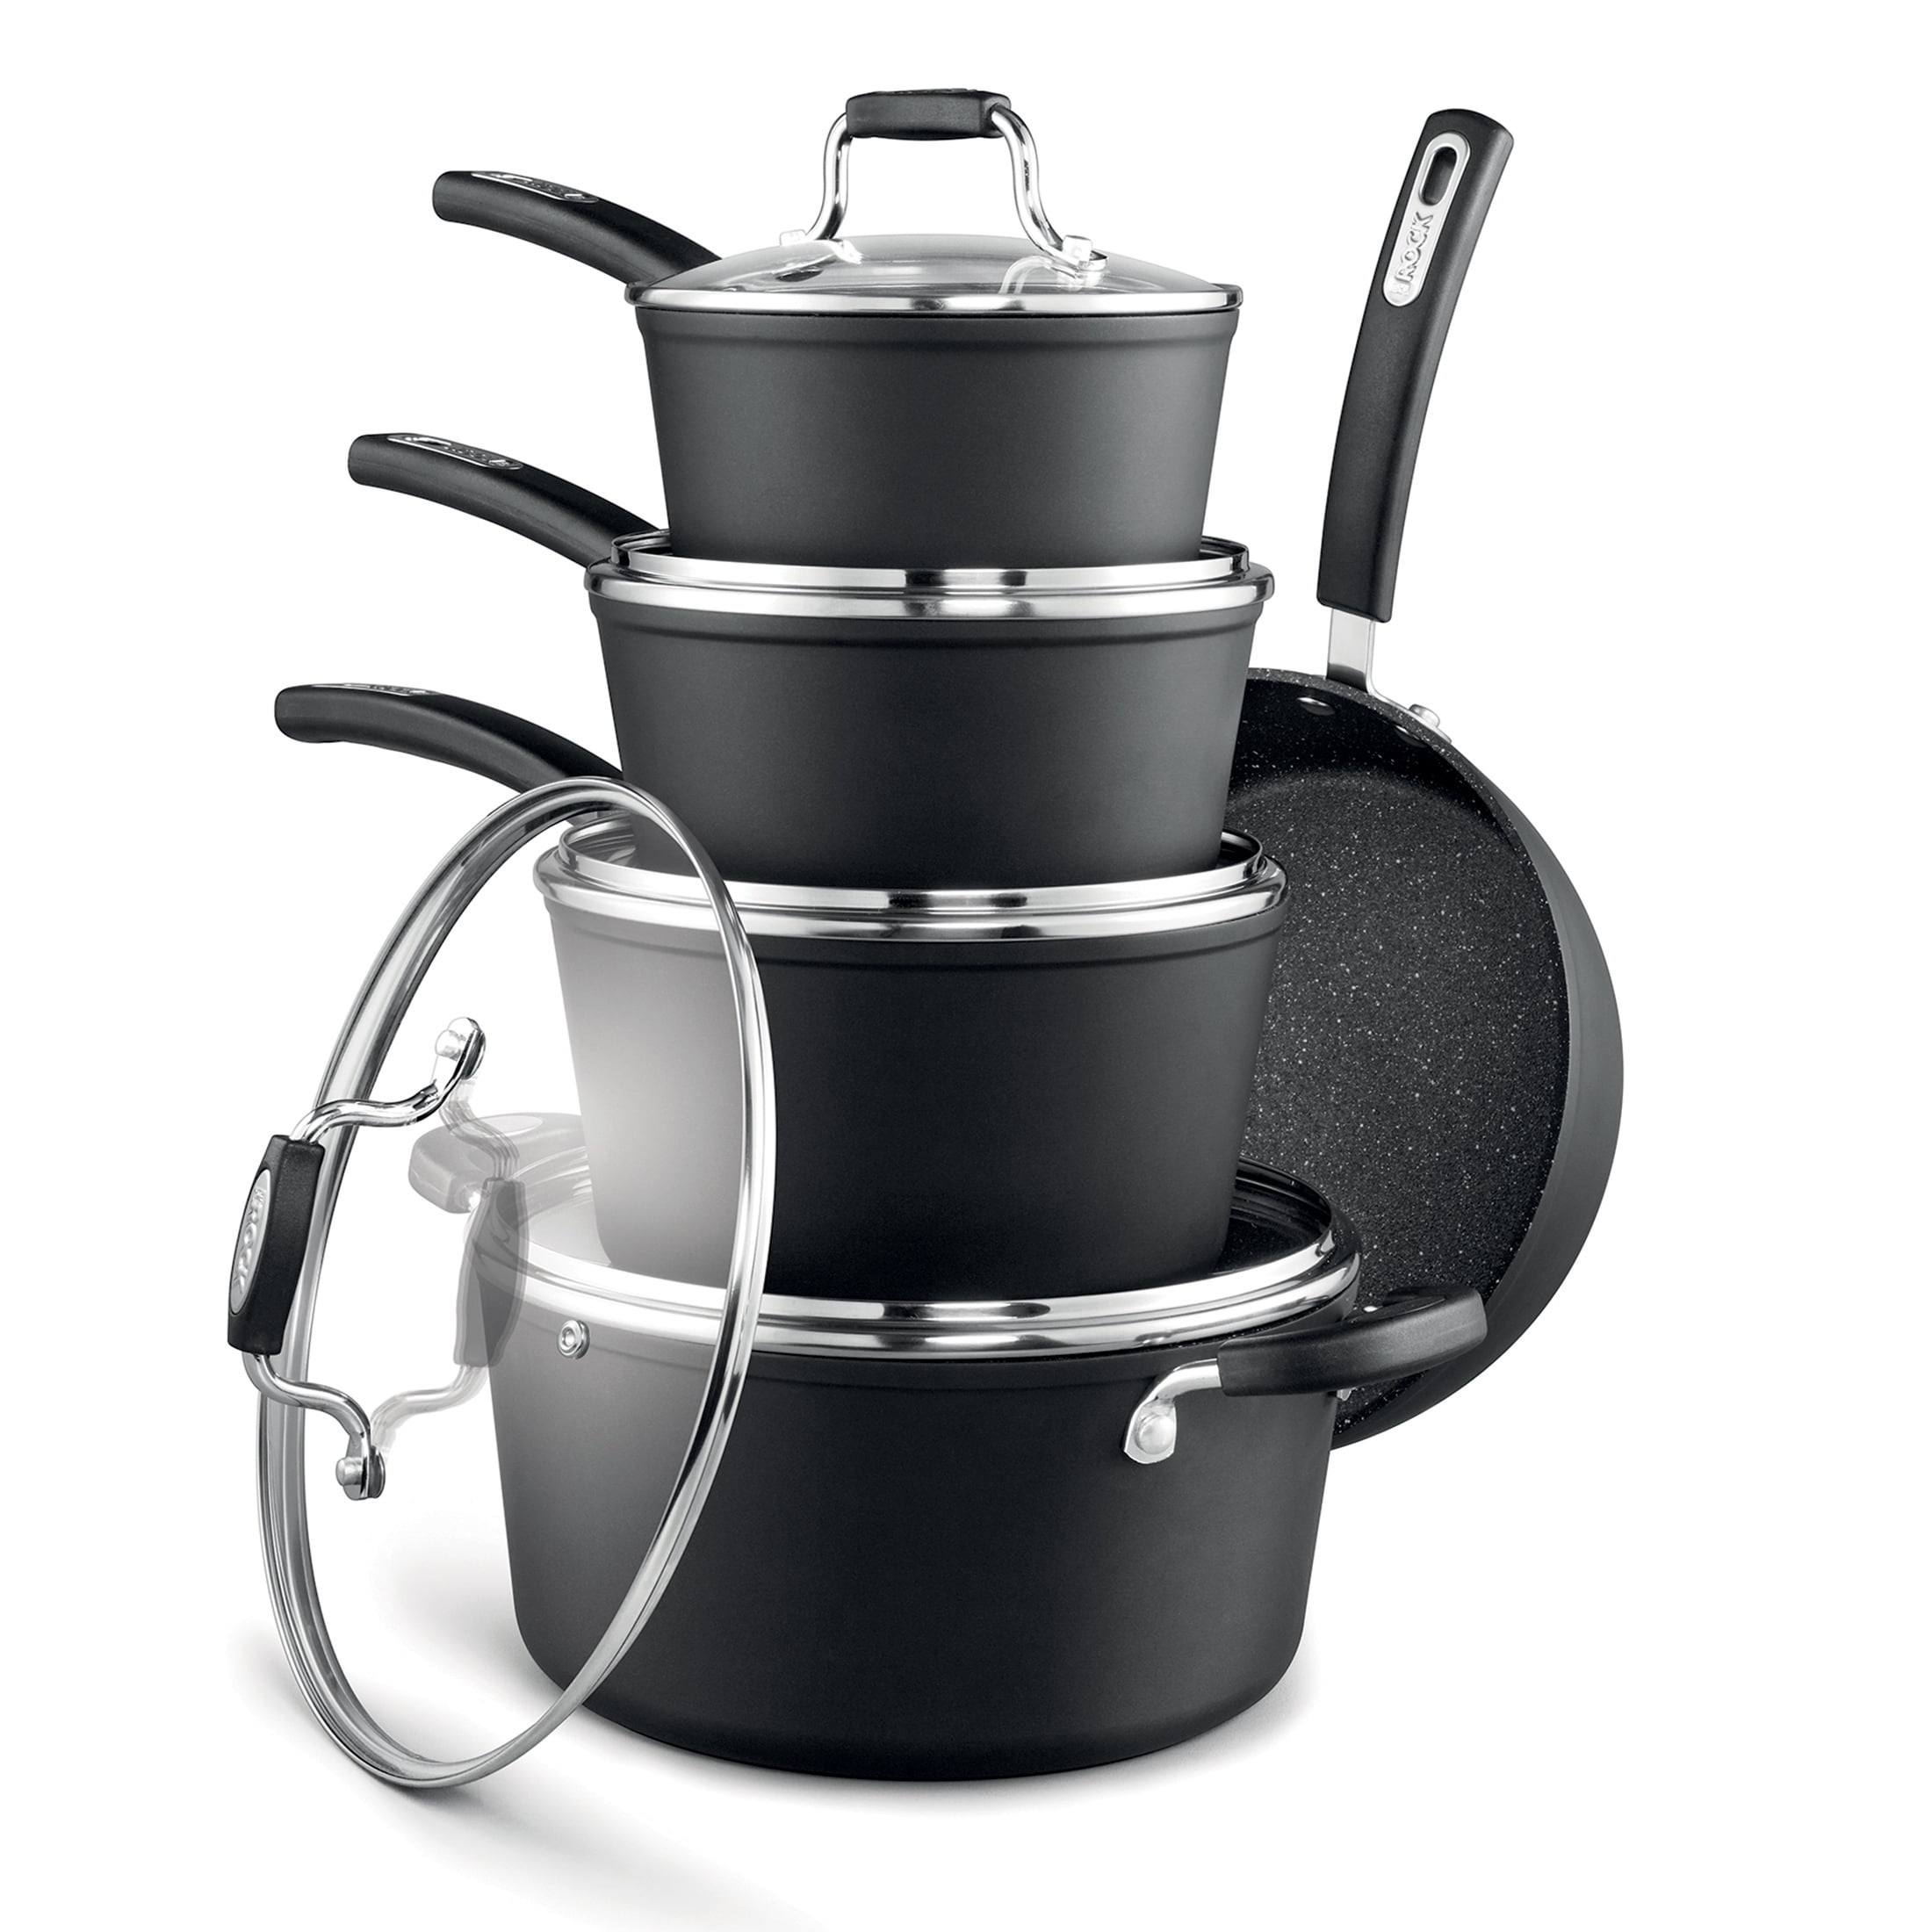 The Rock by Starfrit 10-Piece Cookware Set, 1 unit - Pick 'n Save